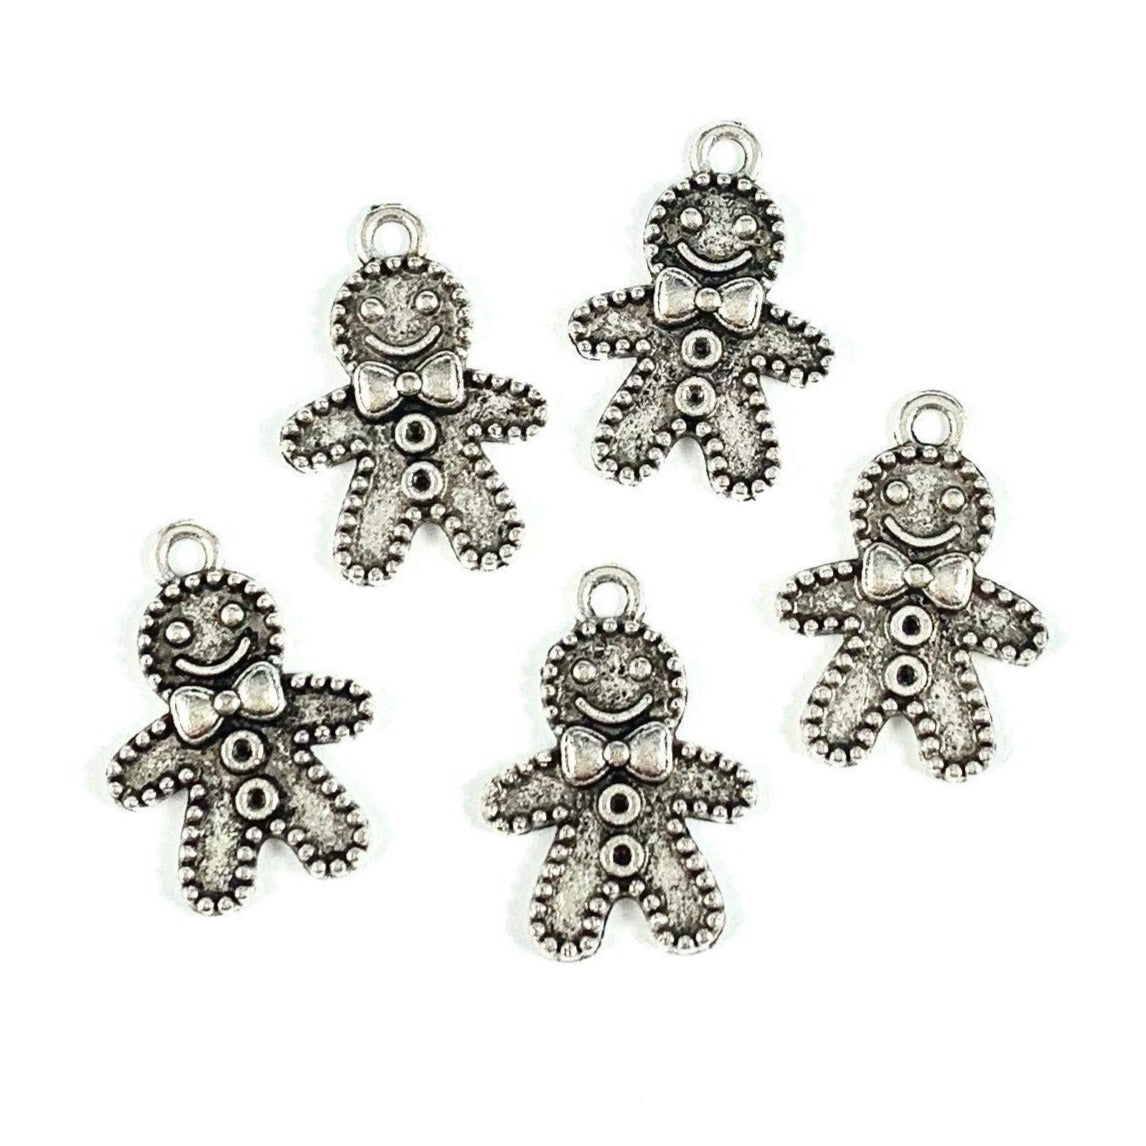 Gingerbread Man Charms - Silver